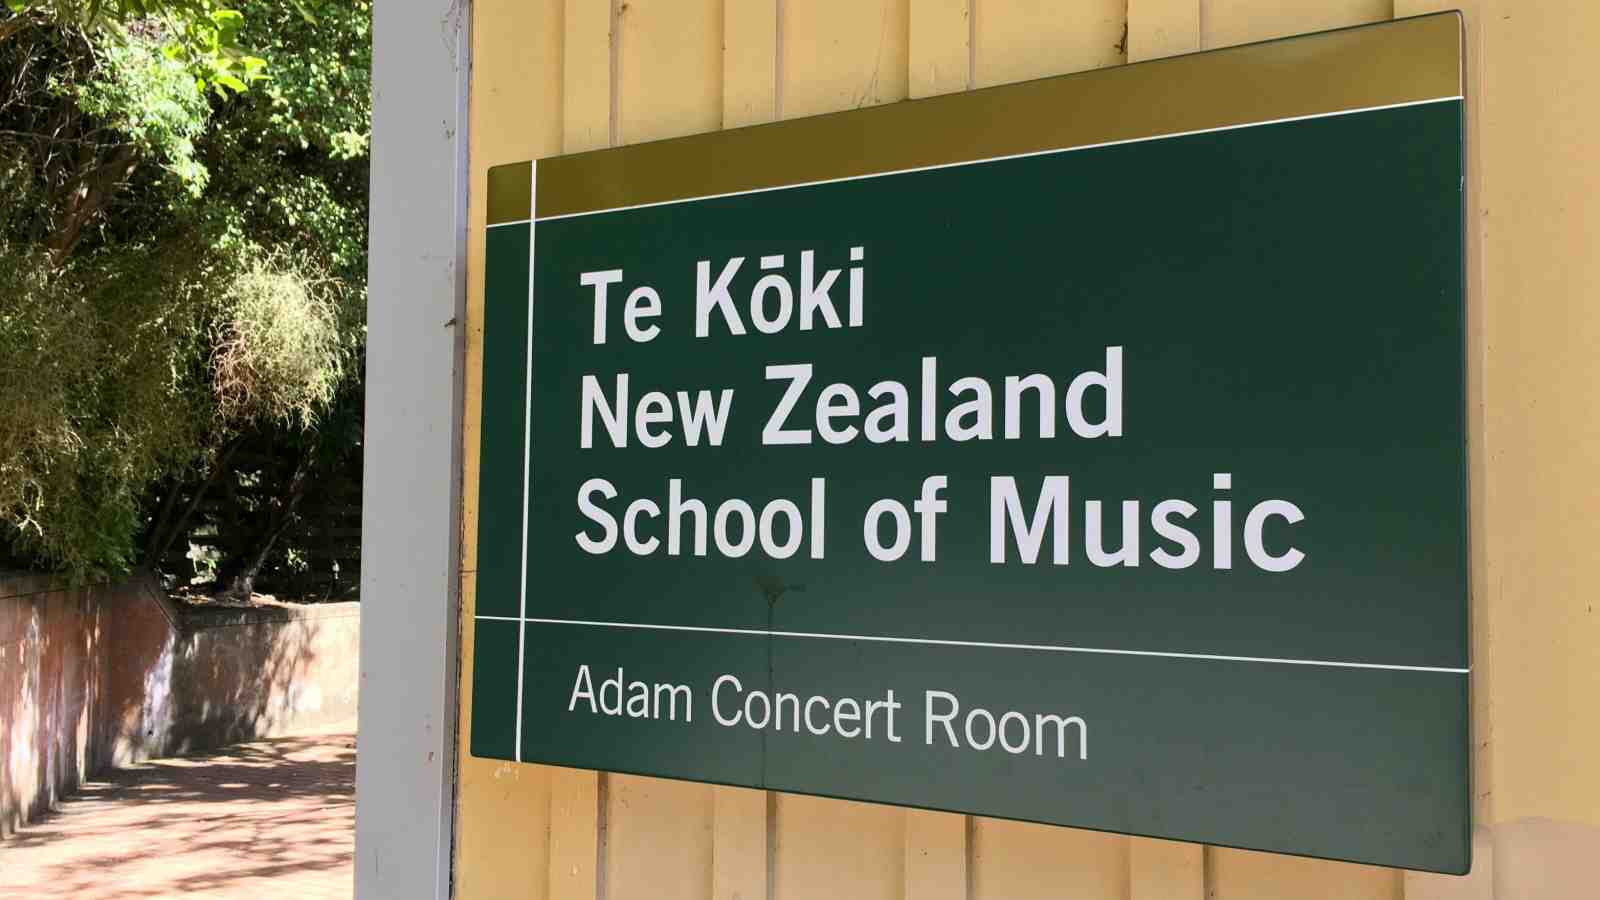 About our name - Te Kōkī New Zealand School of Music